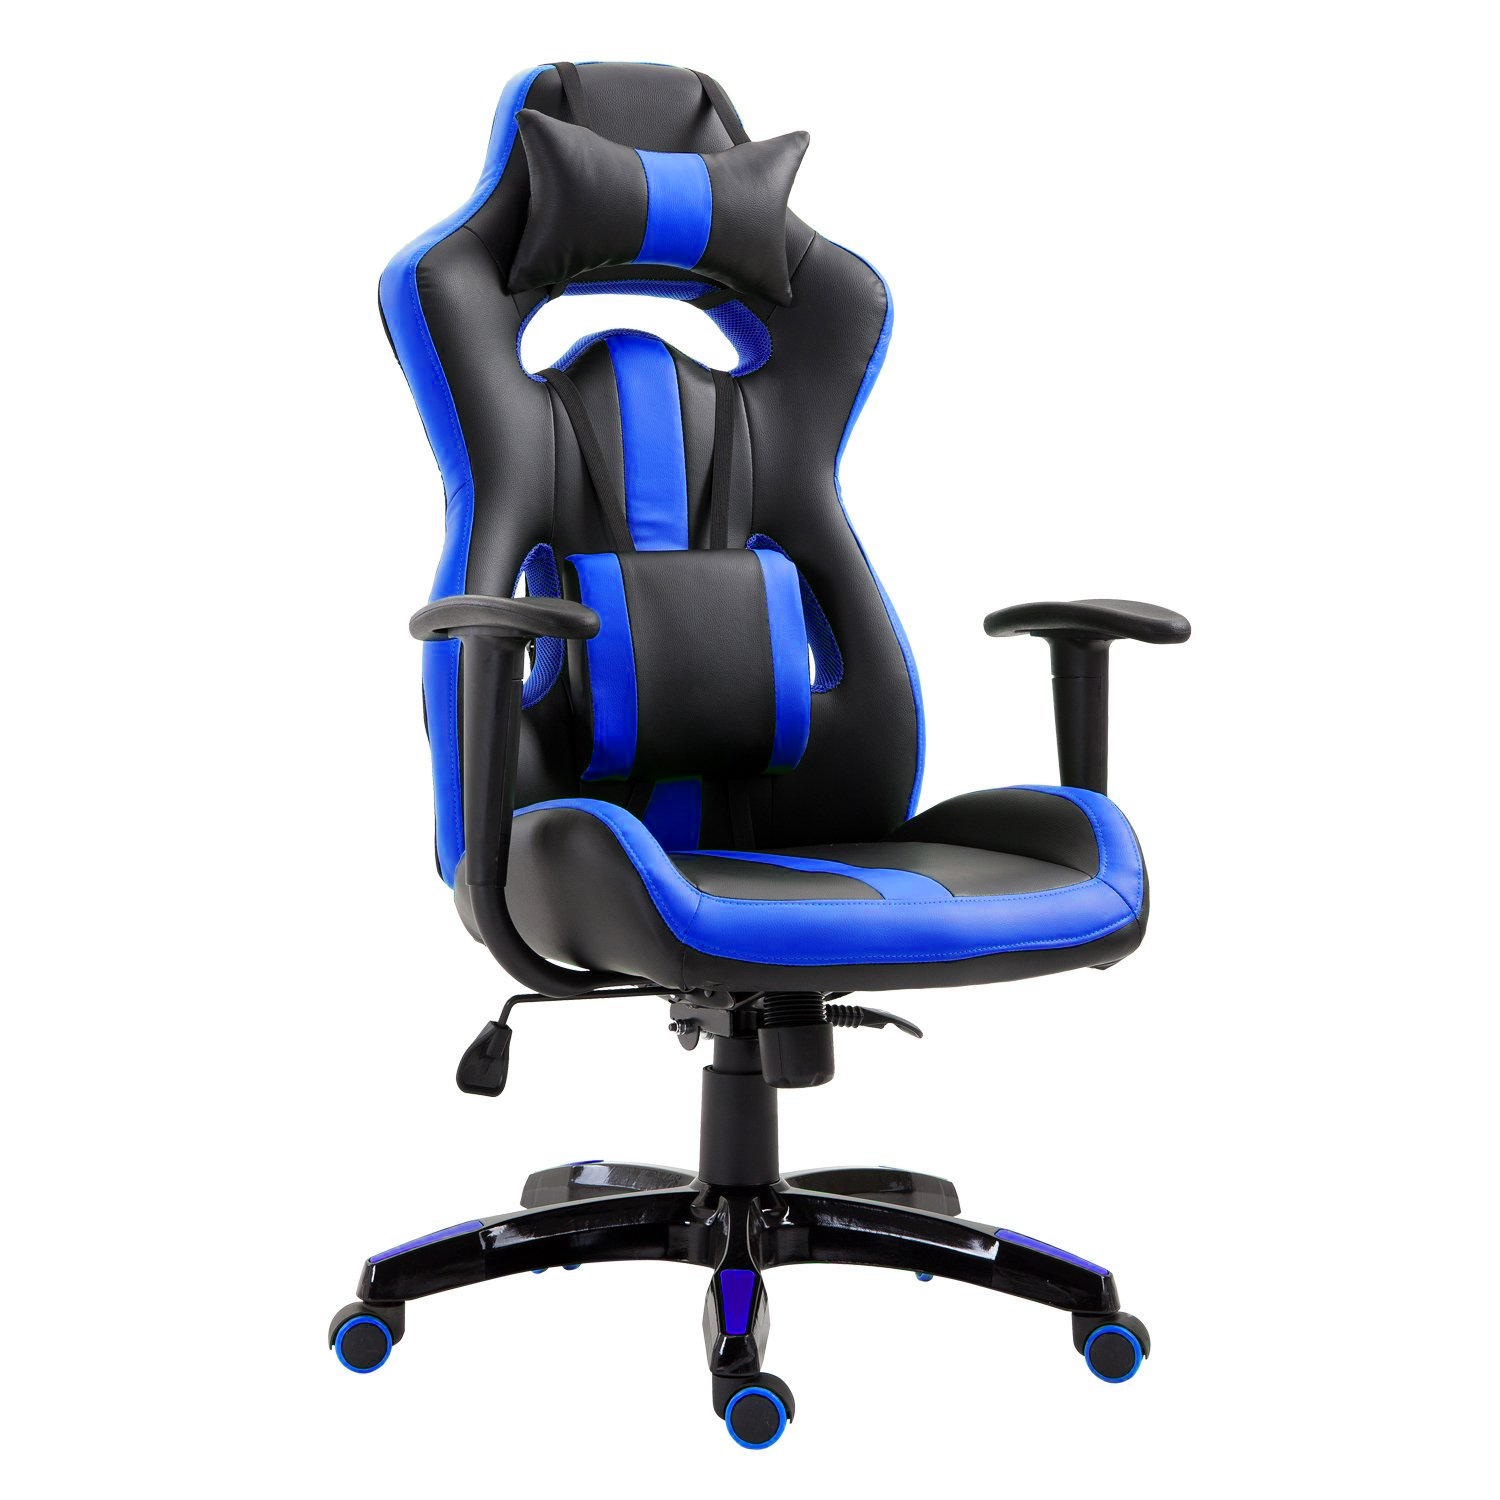 GAMING CHAIR OFFICE CHAIR RACING Dealsdirect.co.nz